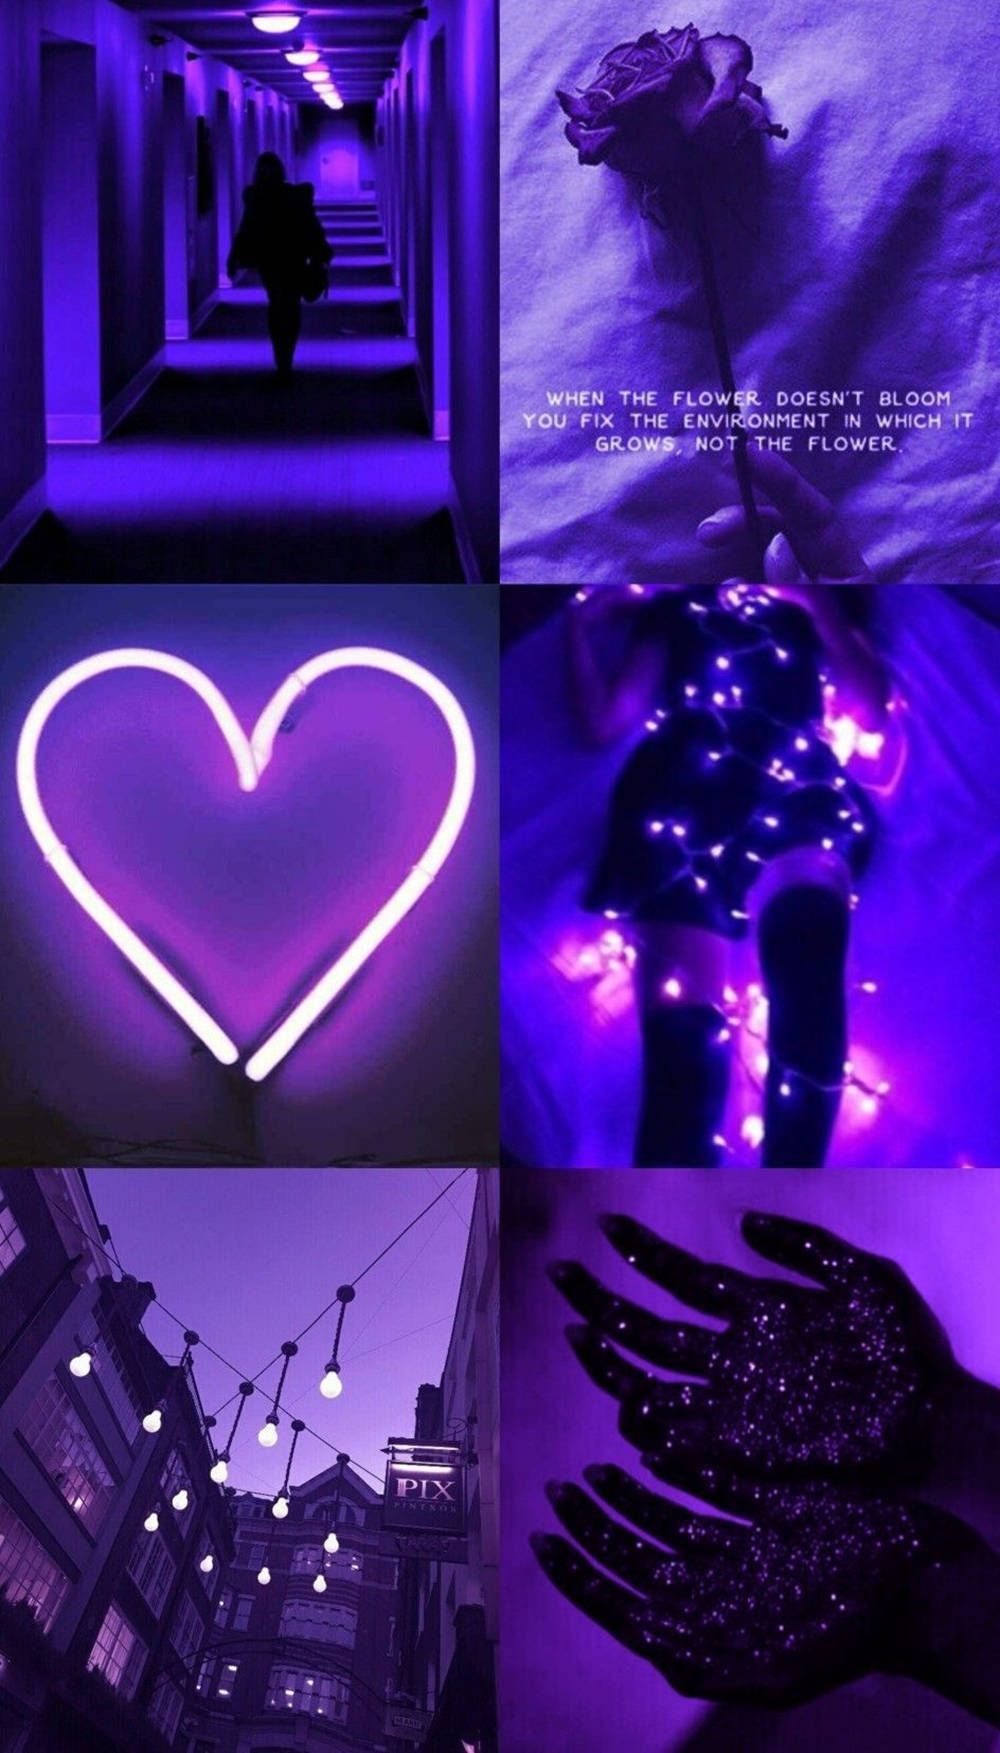 Aesthetic purple background with neon heart, couple, and glittering hands - Purple, neon purple, light purple, dark purple, cute purple, violet, neon pink, light pink